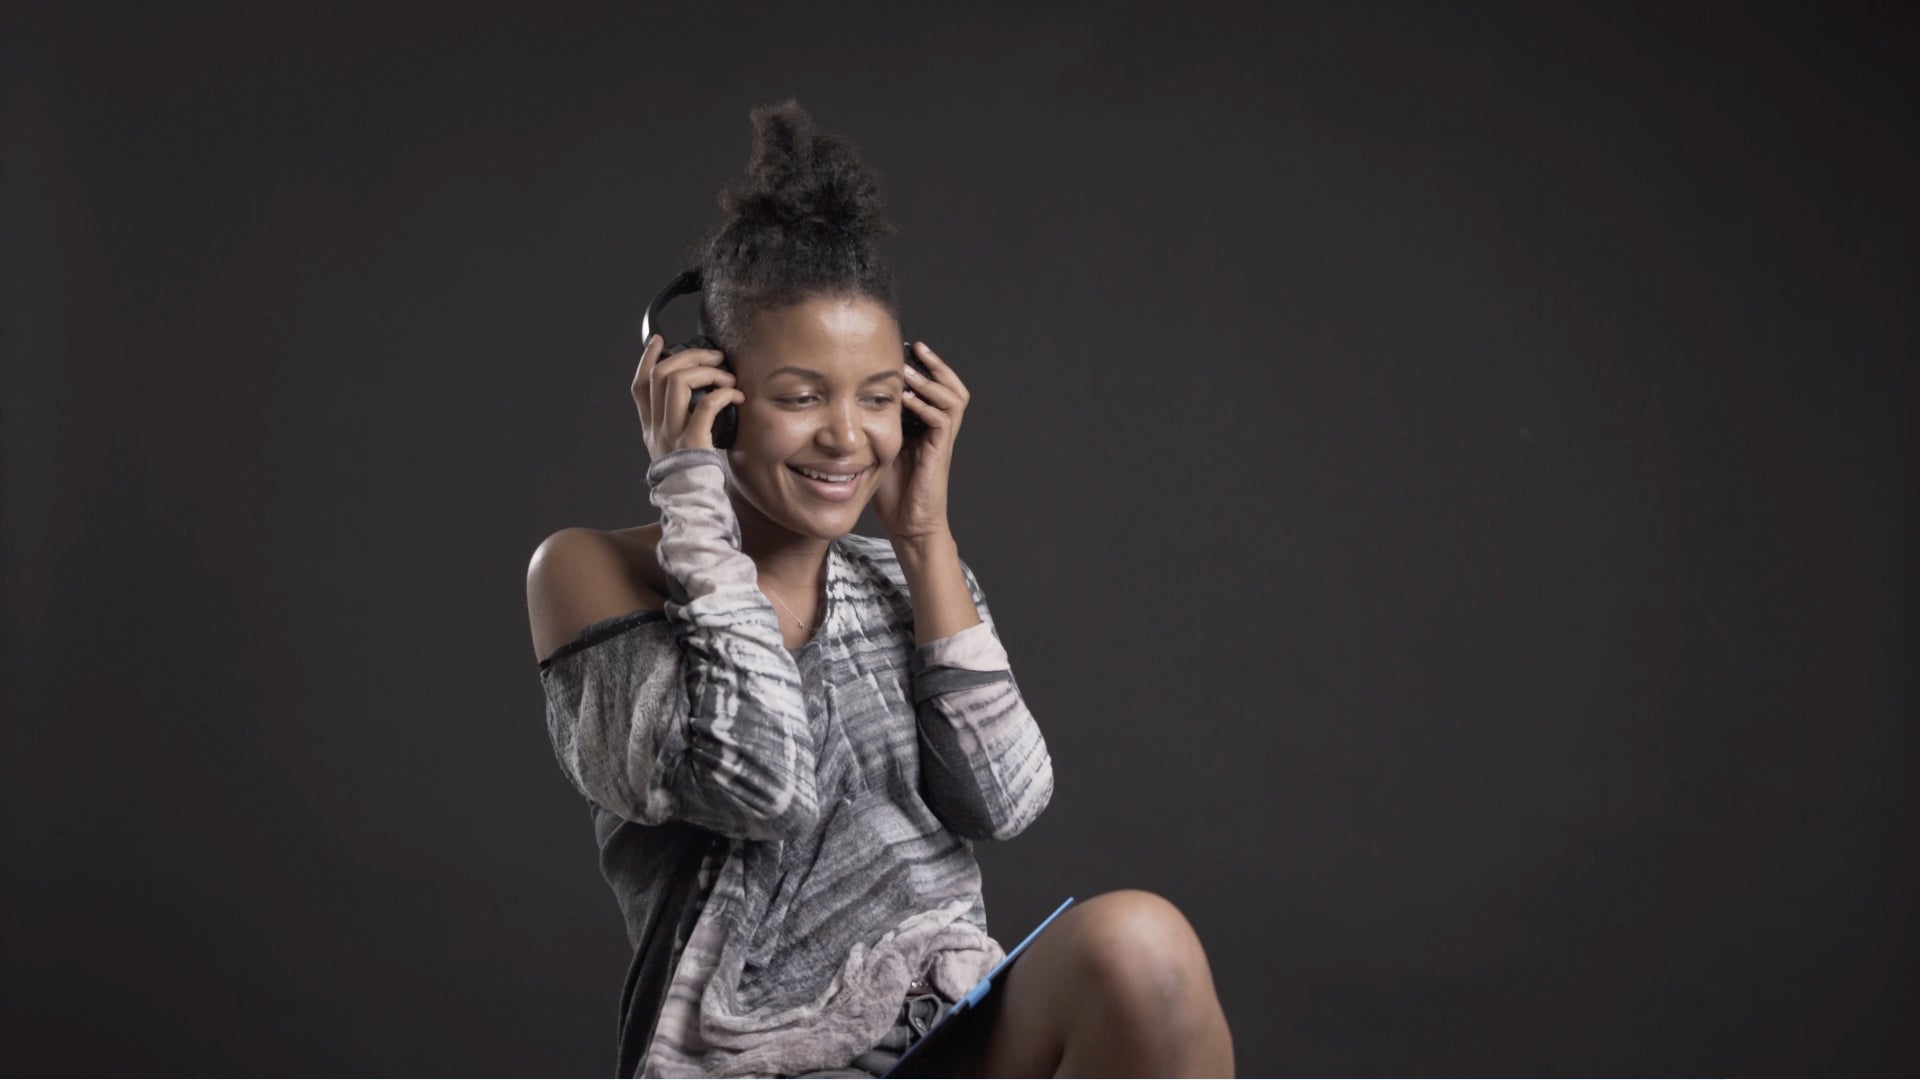 A woman wearing Audeara headphones smiling and grooving to music